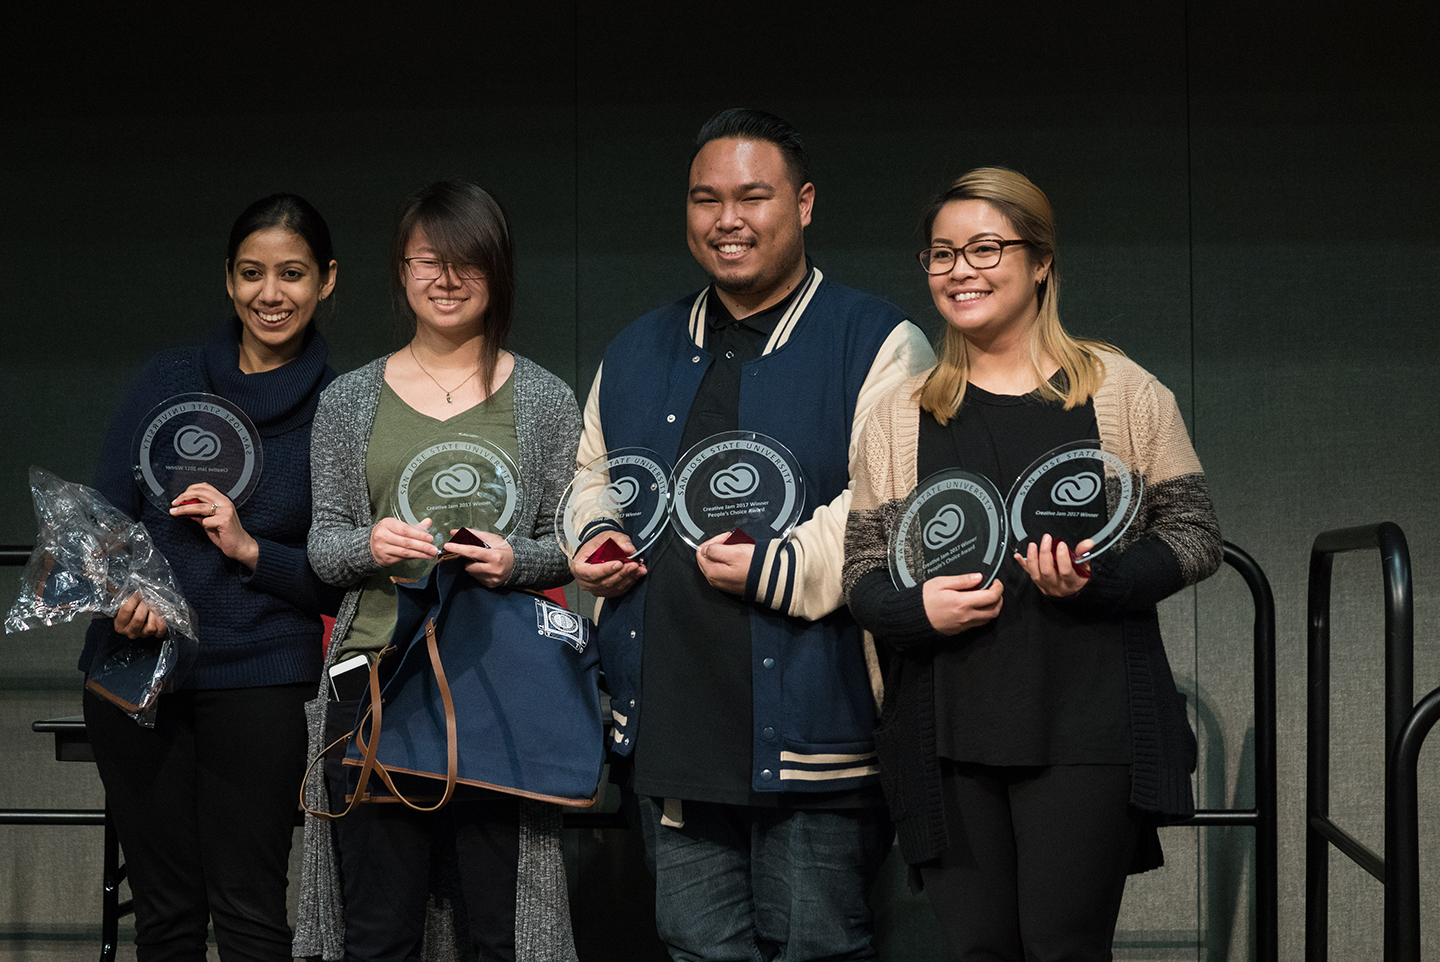 SJSU students (left to right) Vasadha Varma, Ashley Chung, Miles Vallejos and Mariella Perez were selected for best design at the Adobe CreativeJam. (Photo: James Tensuan, '15 Journalism)